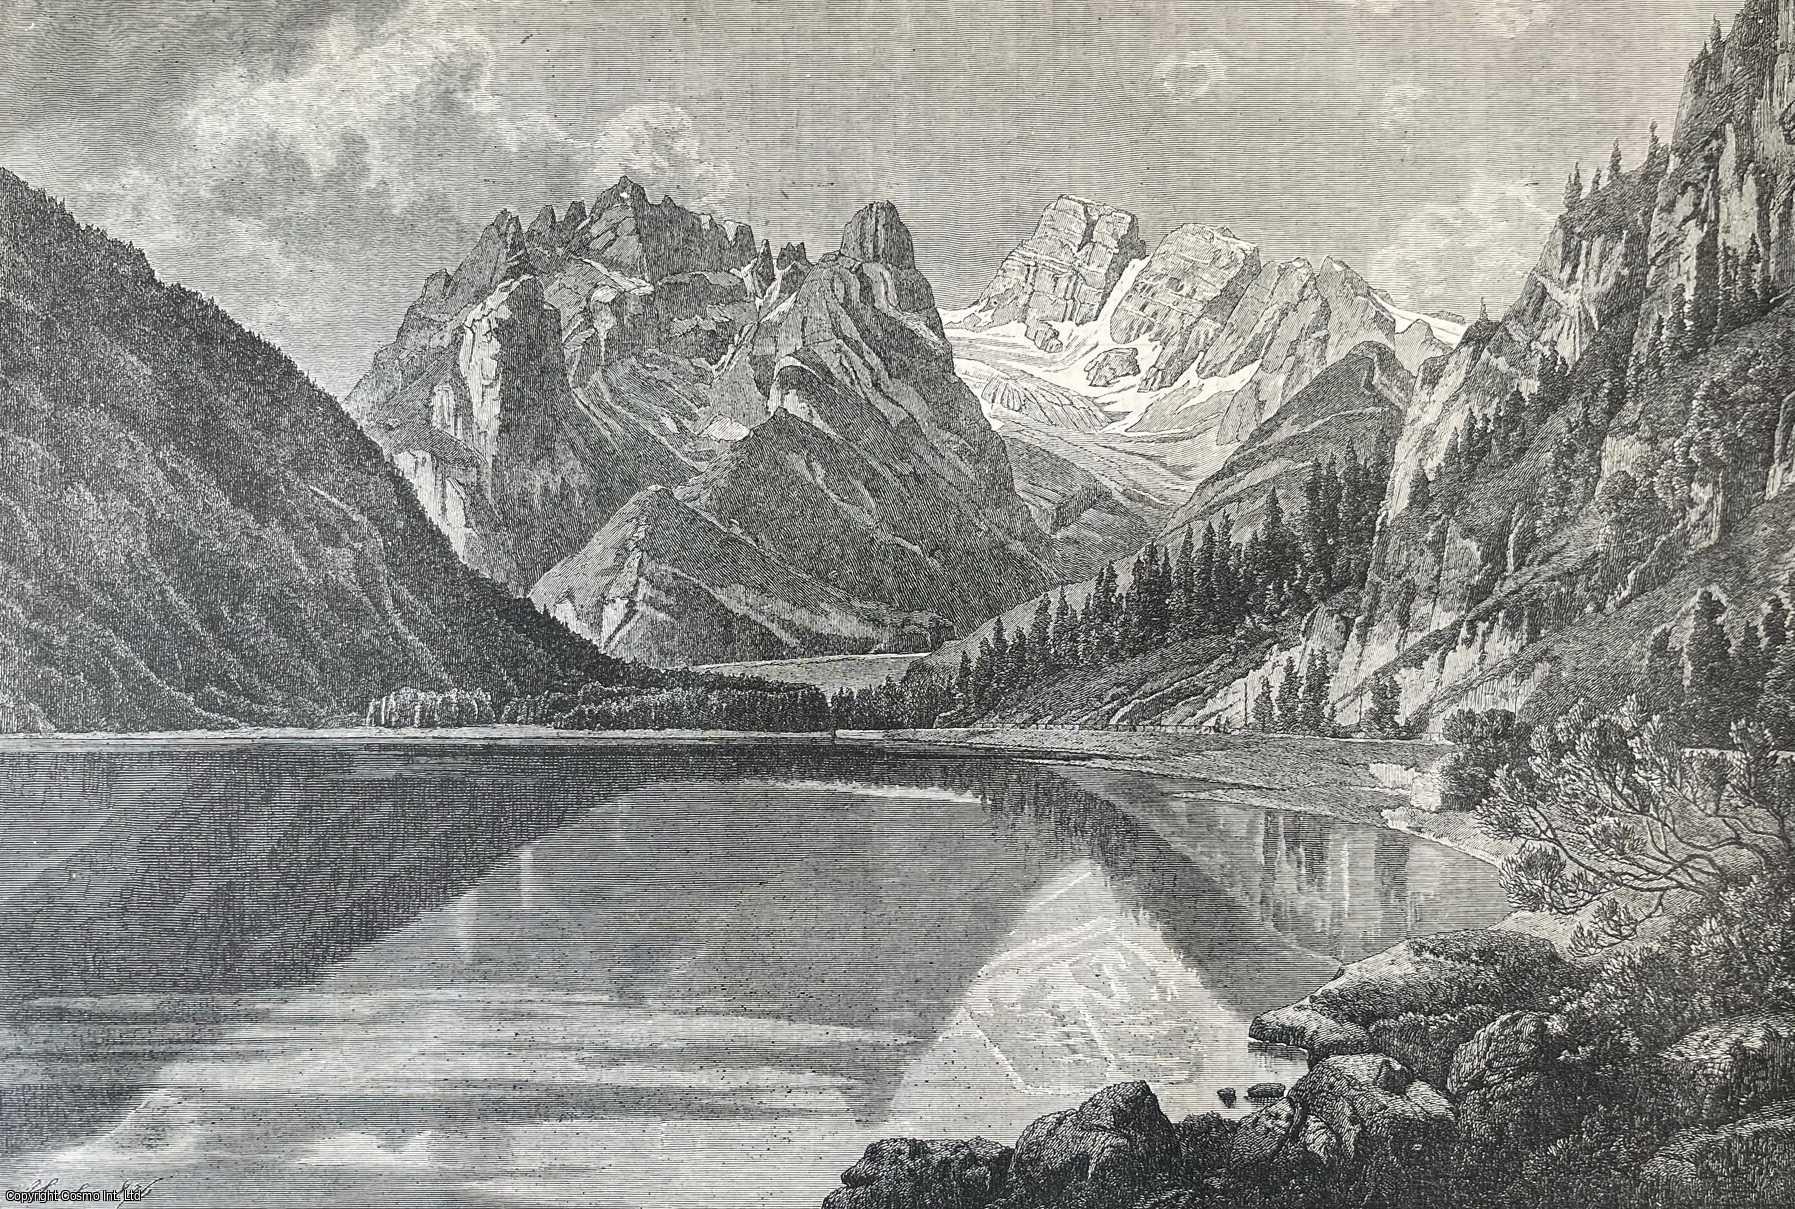 TYROL - Scenery of the Tyrol: Monte Cristallo and the Durren See. An original woodcut engraving, from the Illustrated London News, 1877.